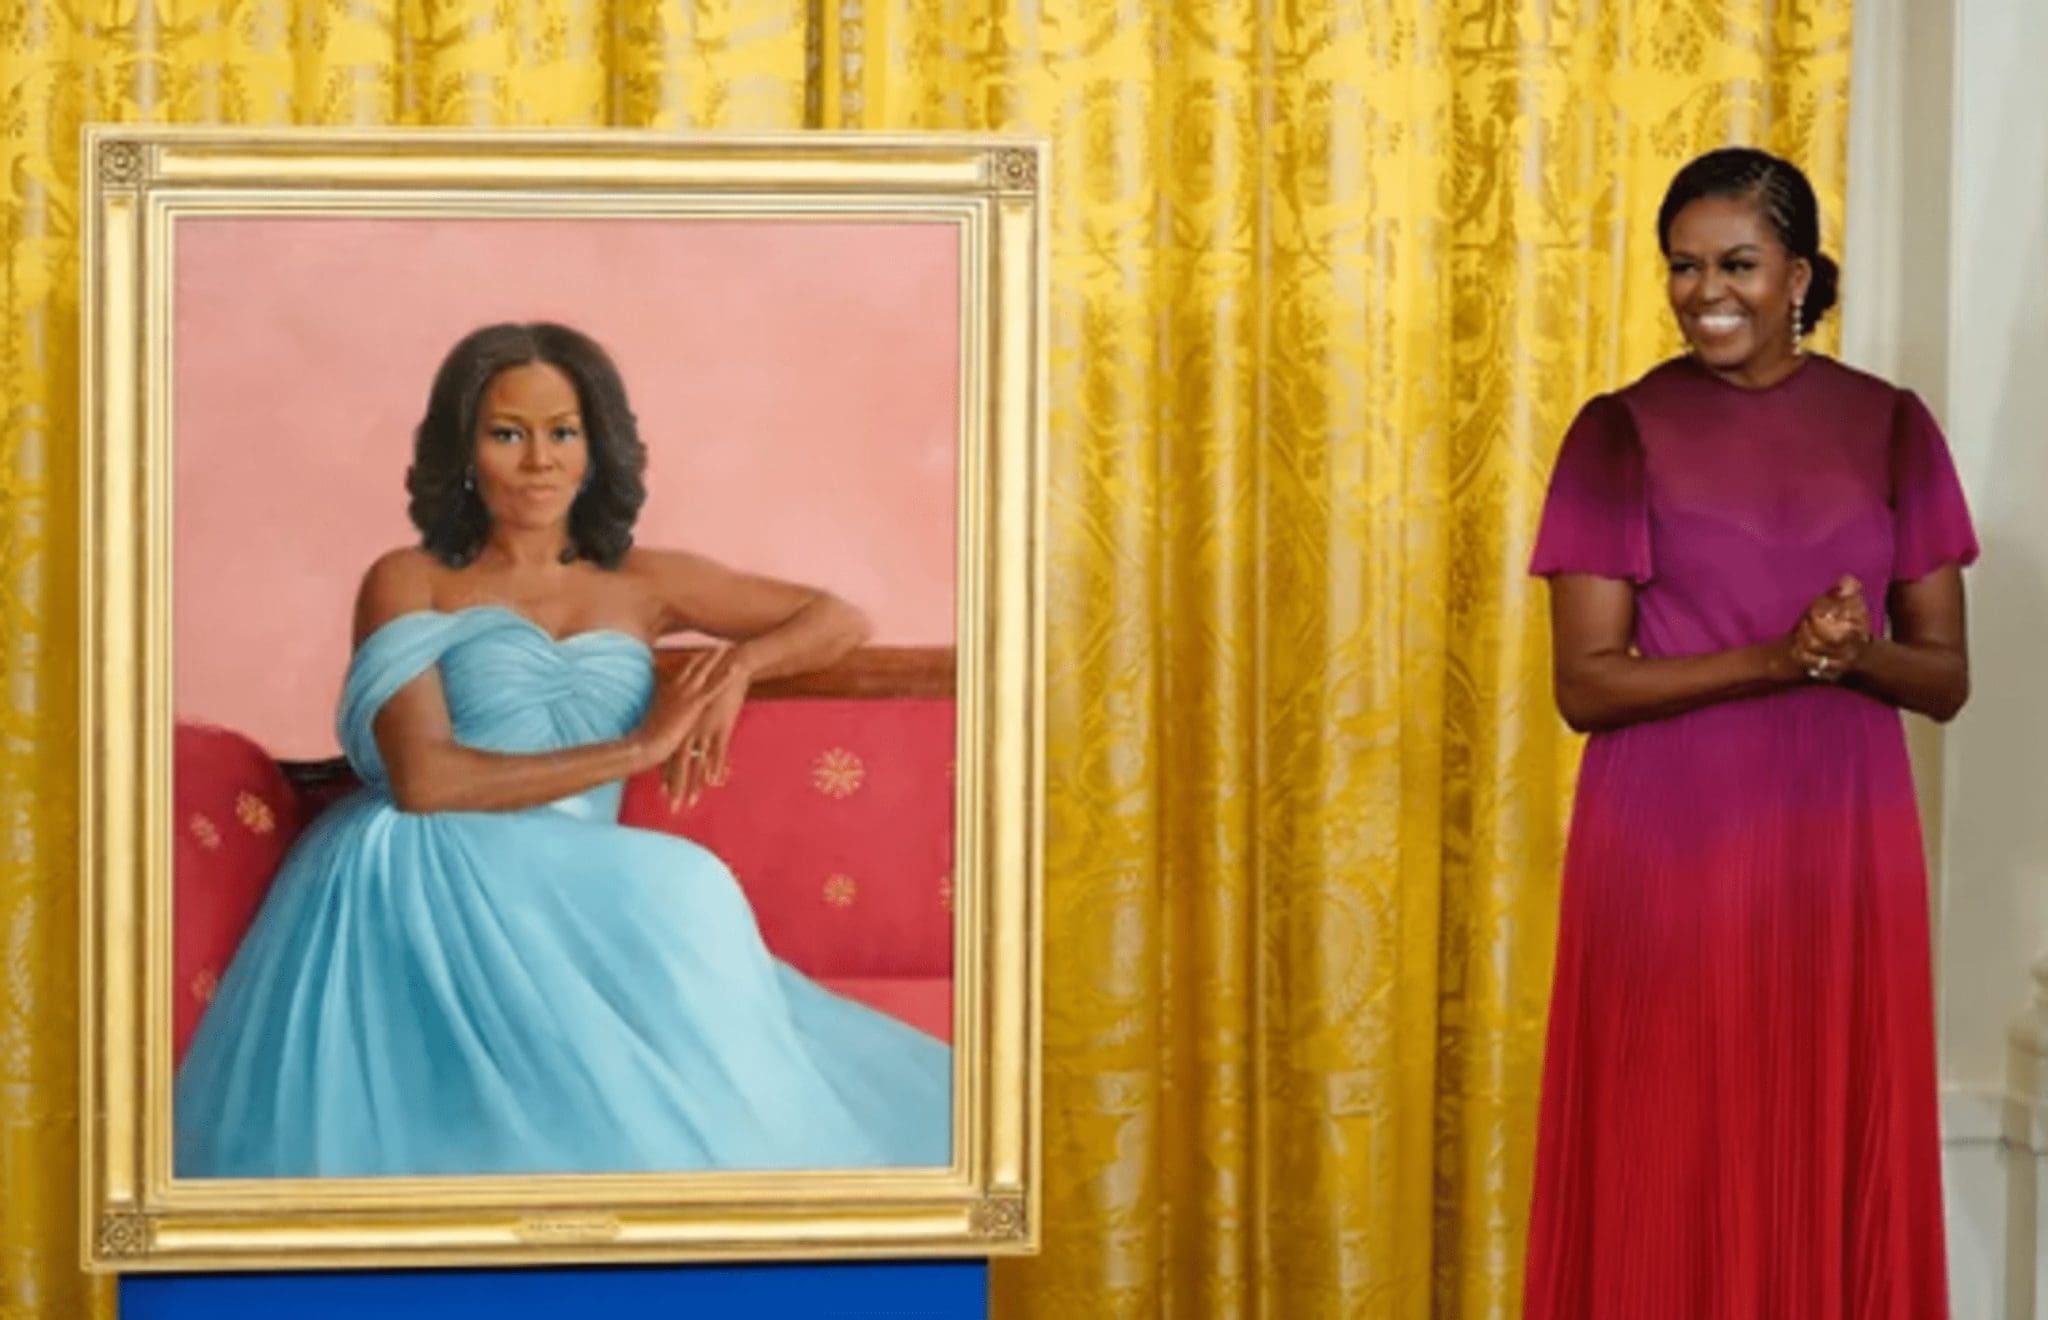 Michelle Obama Mentions Trump In General Terms During The Picture Unveiling